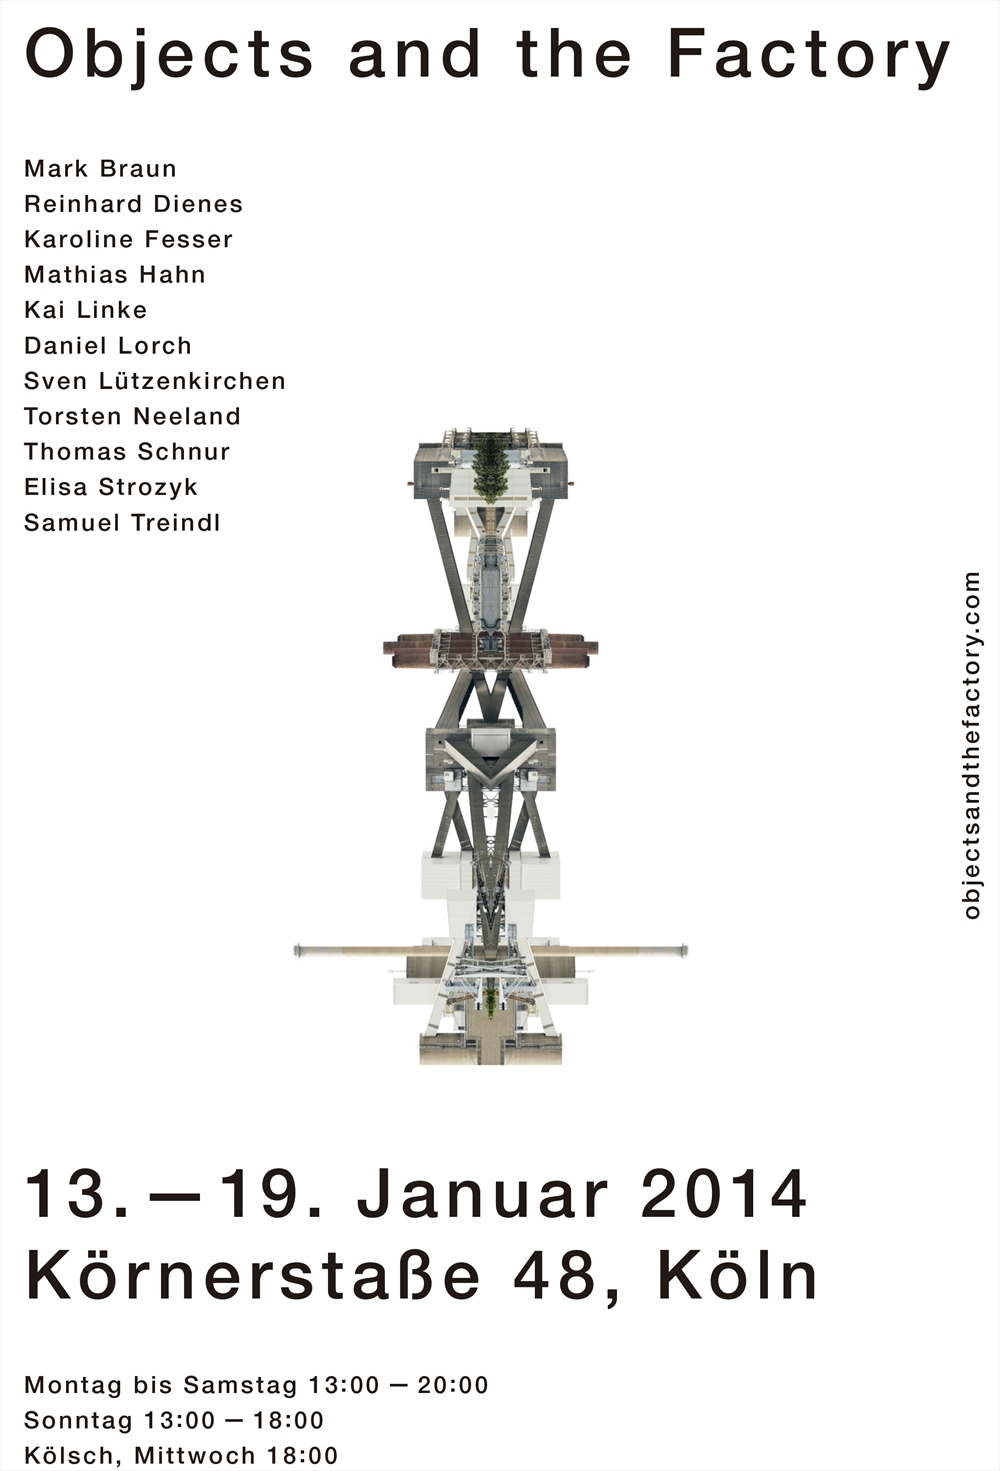 Archisearch 'OBJECTS AND THE FACTORY' 2014 EXHIBITION IN KÖLN